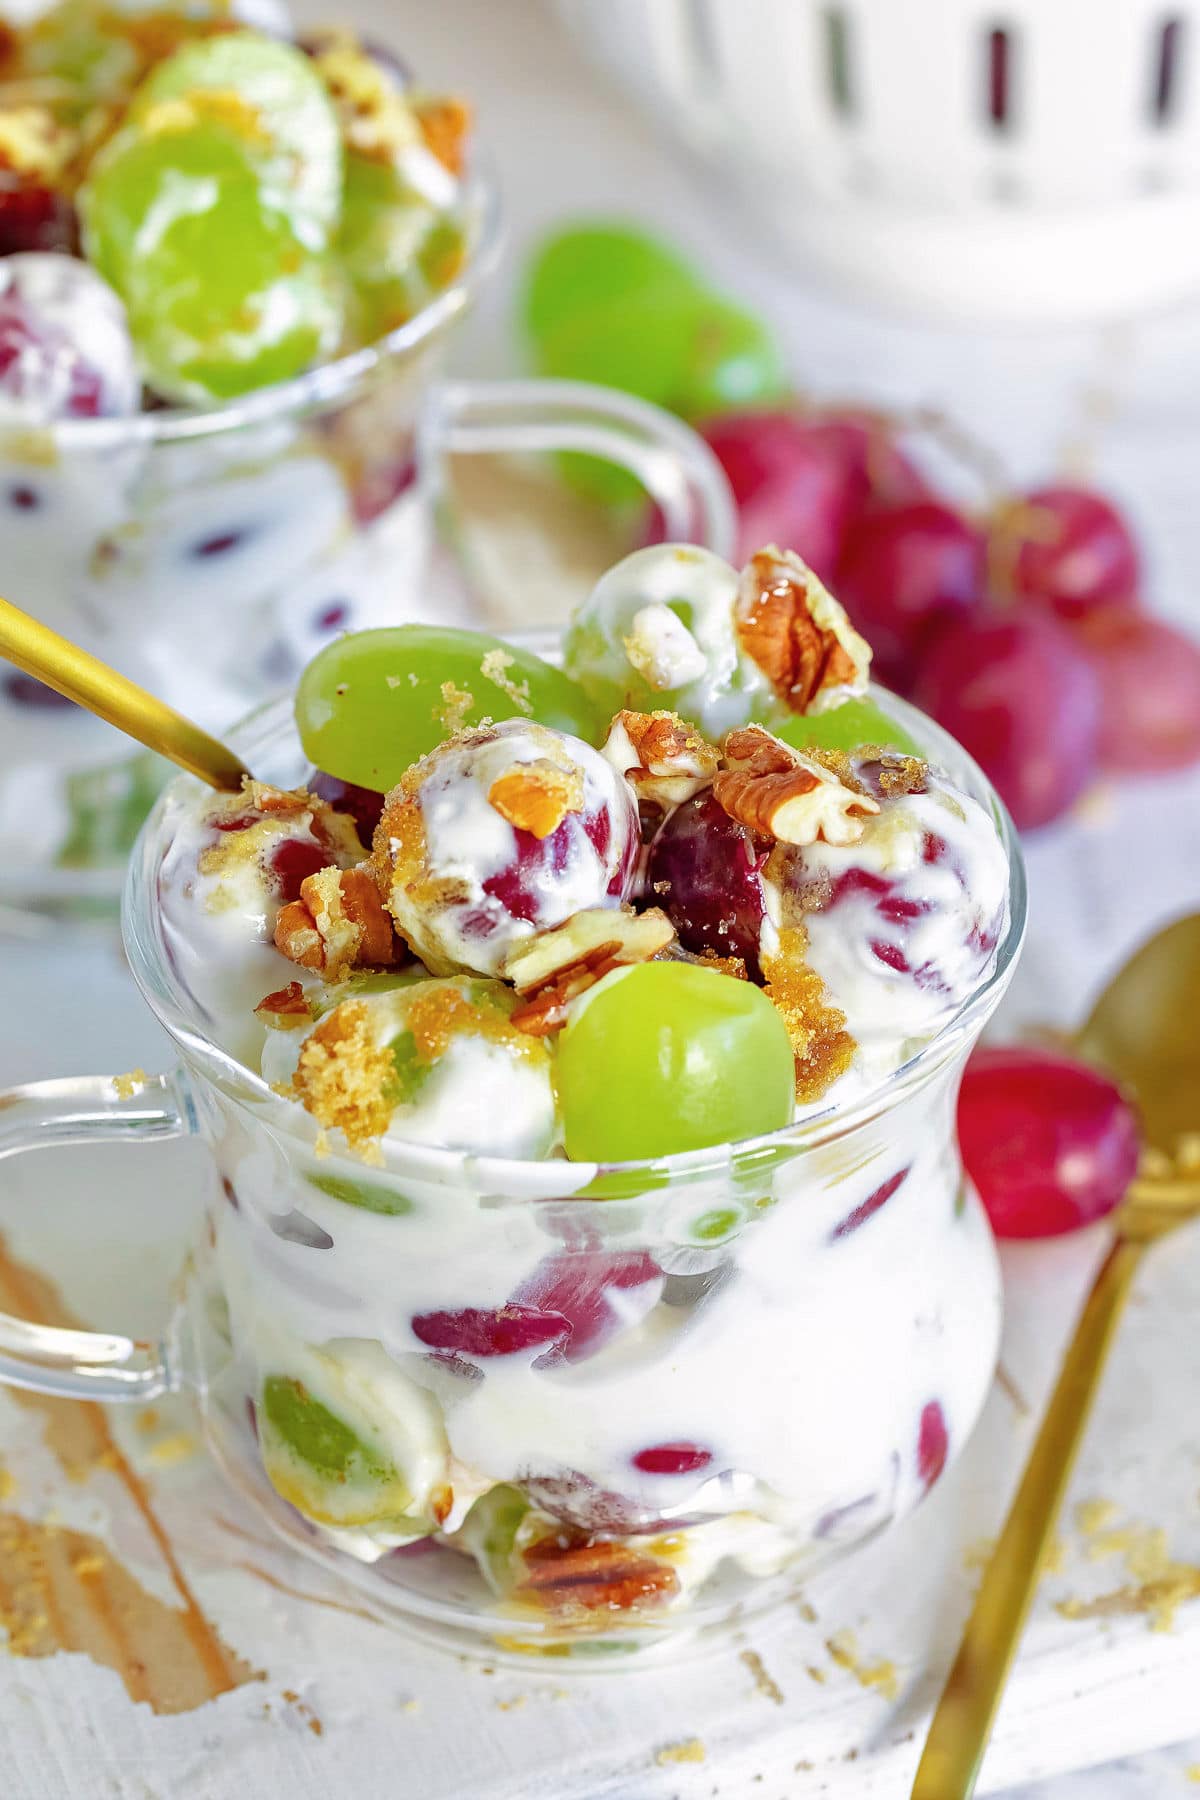 grape salad with cream cheese dressing in small cup with gold spoon